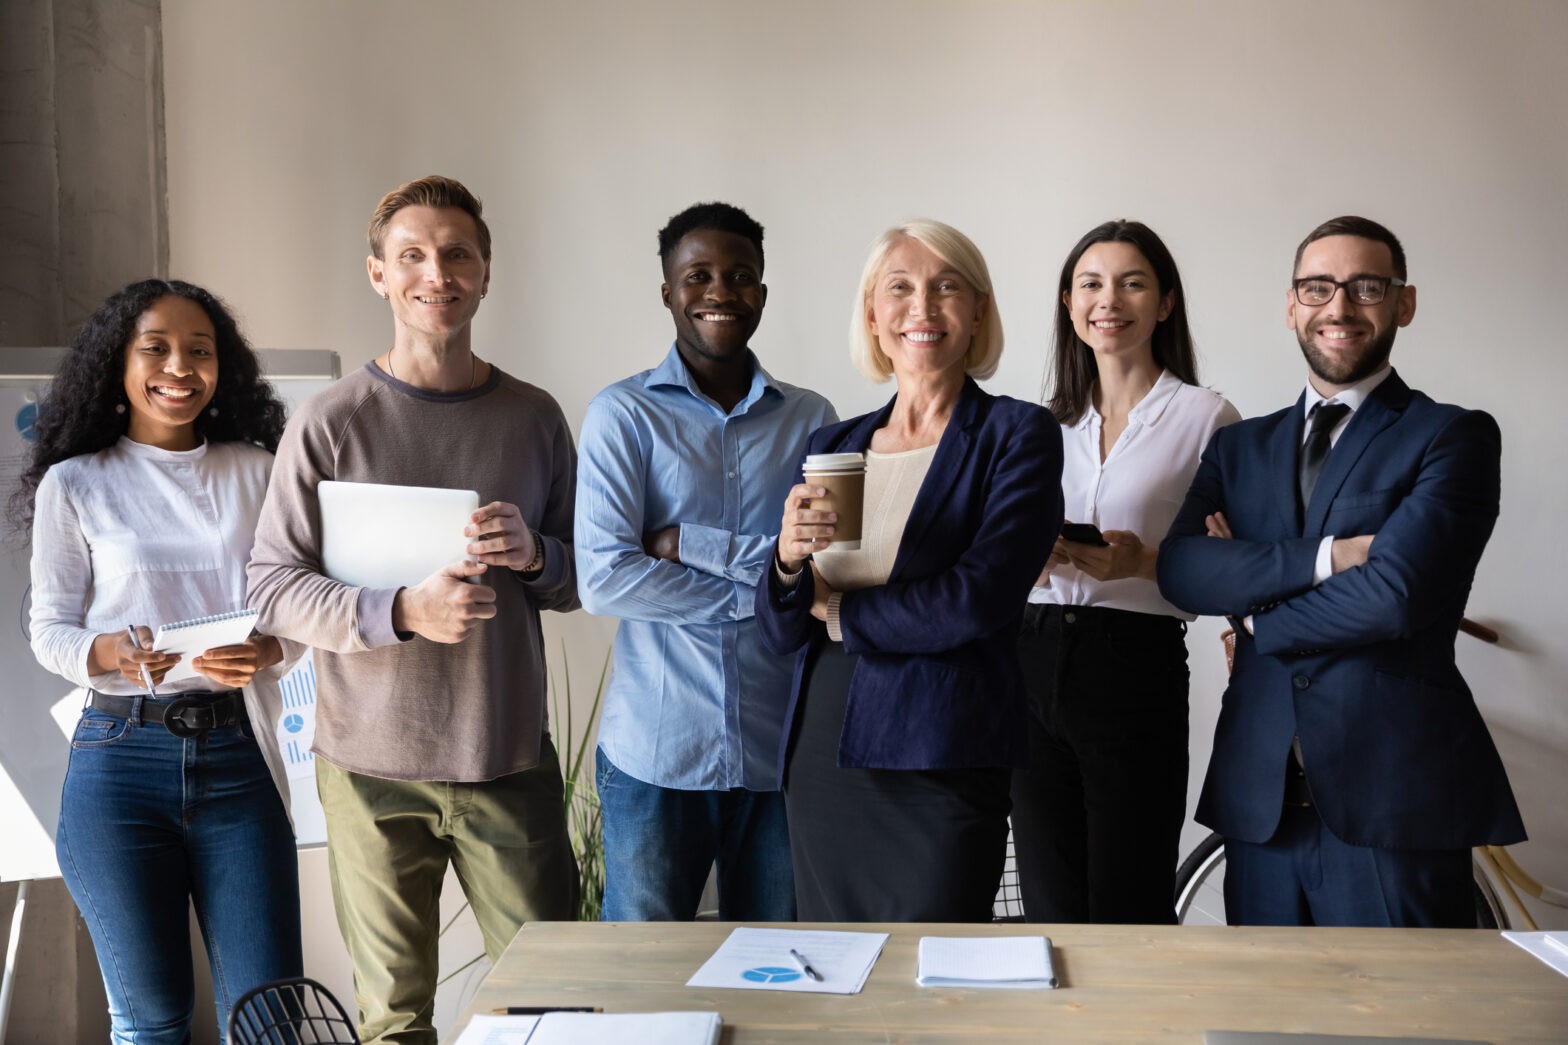 Happy confident diverse businesspeople stand together in office, team portrait